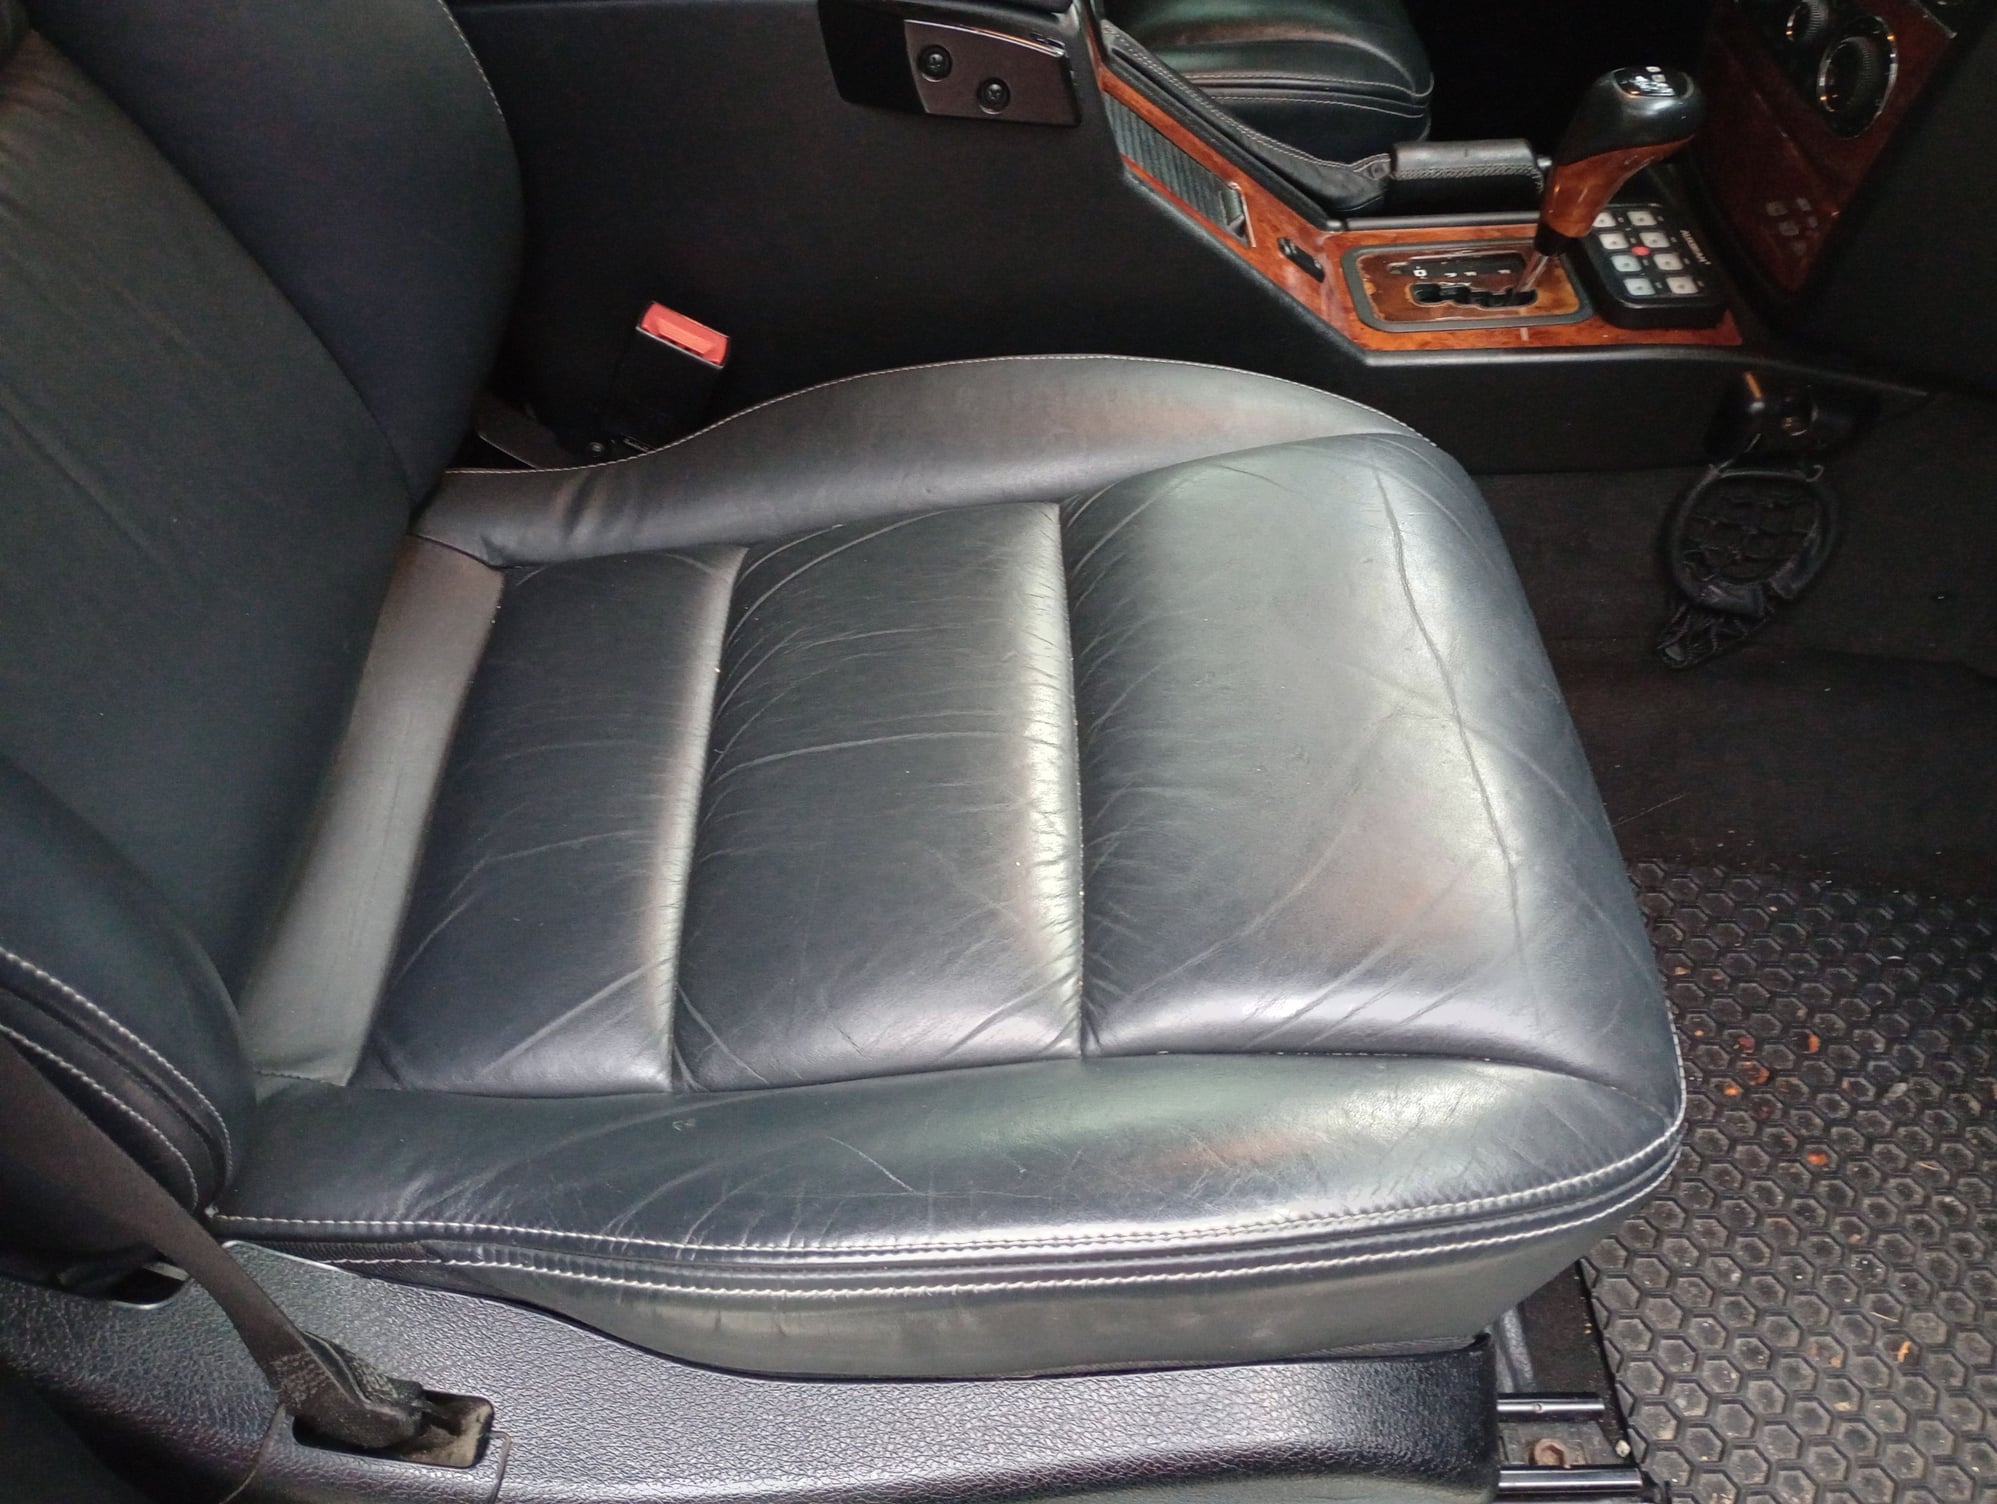 Interior/Upholstery - front seats from 2008 G55 - black designo in great condition - Used - All Years  All Models - Newport News, VA 23606, United States